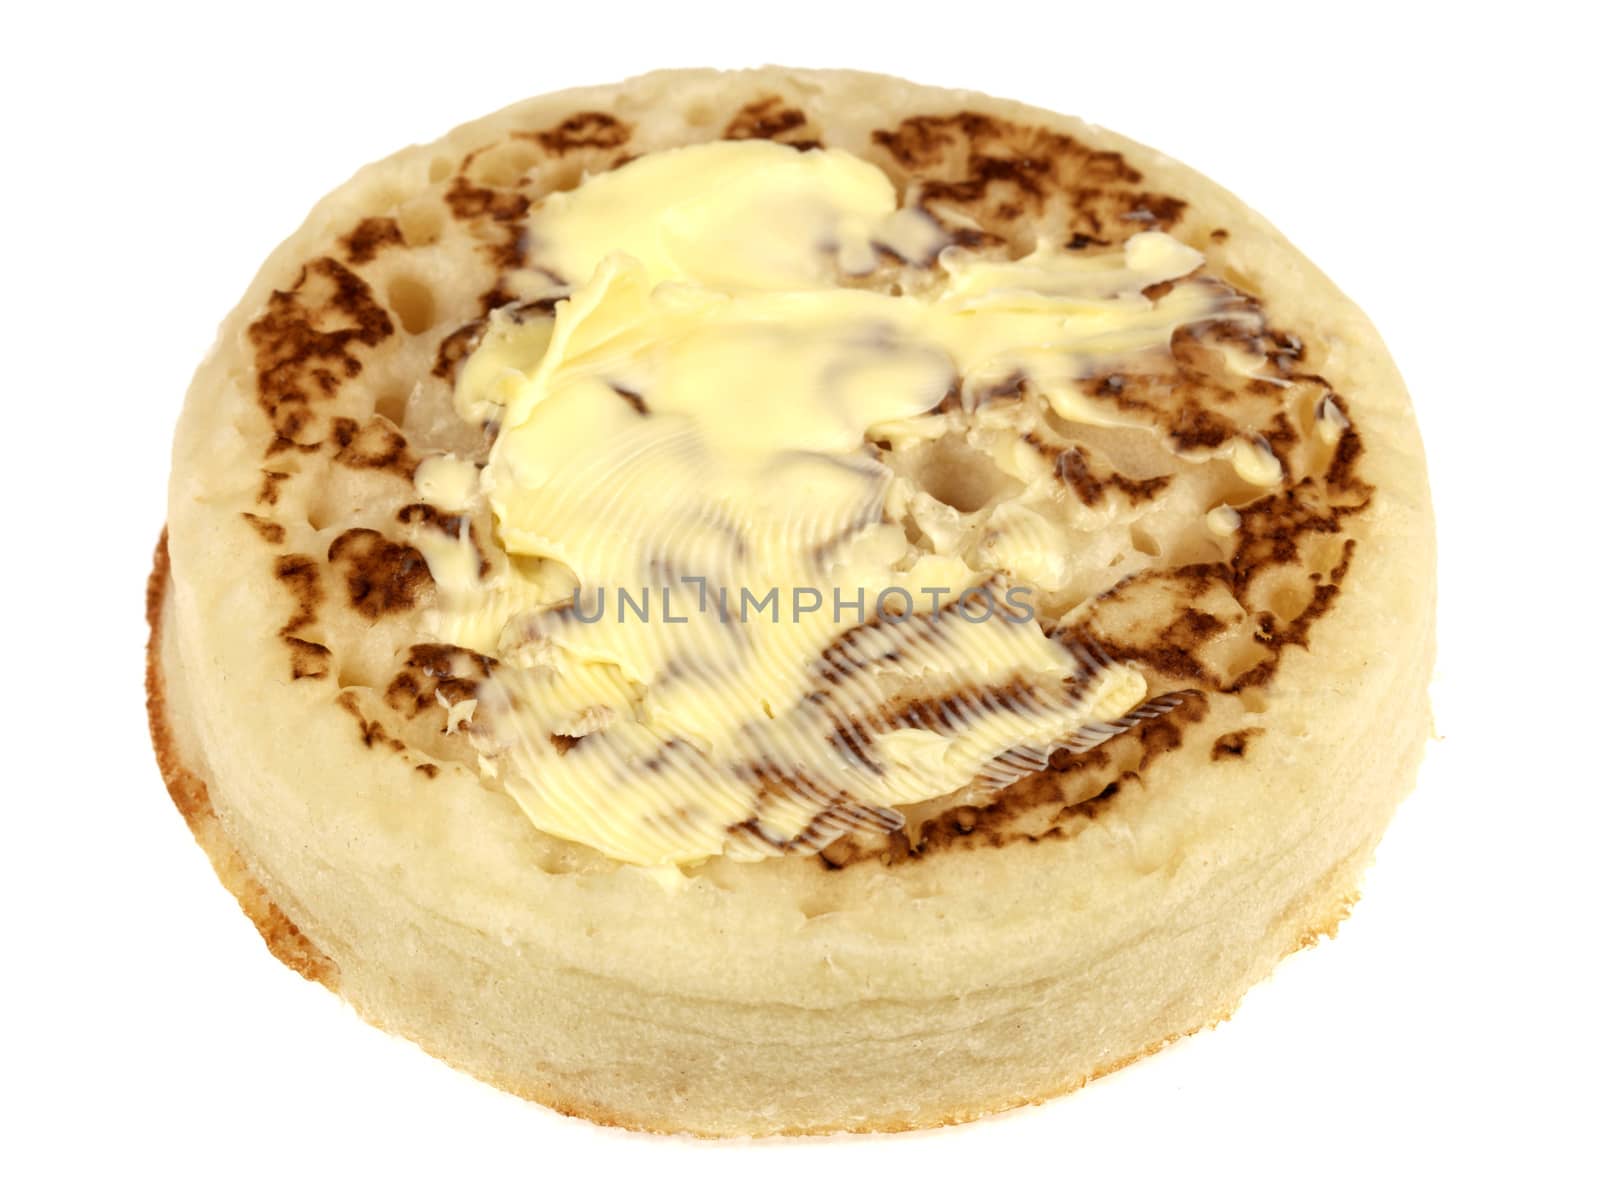 Buttered Crumpet by Whiteboxmedia